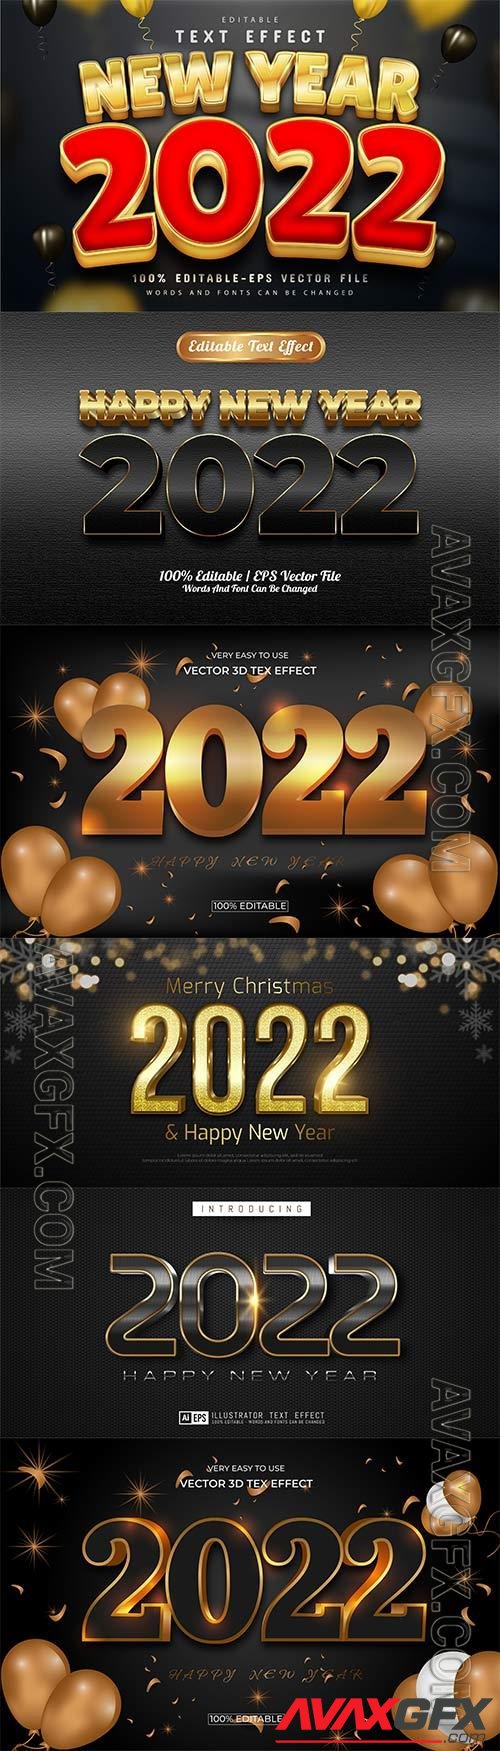 Merry christmas and happy new year 2022 editable vector text effects vol 4